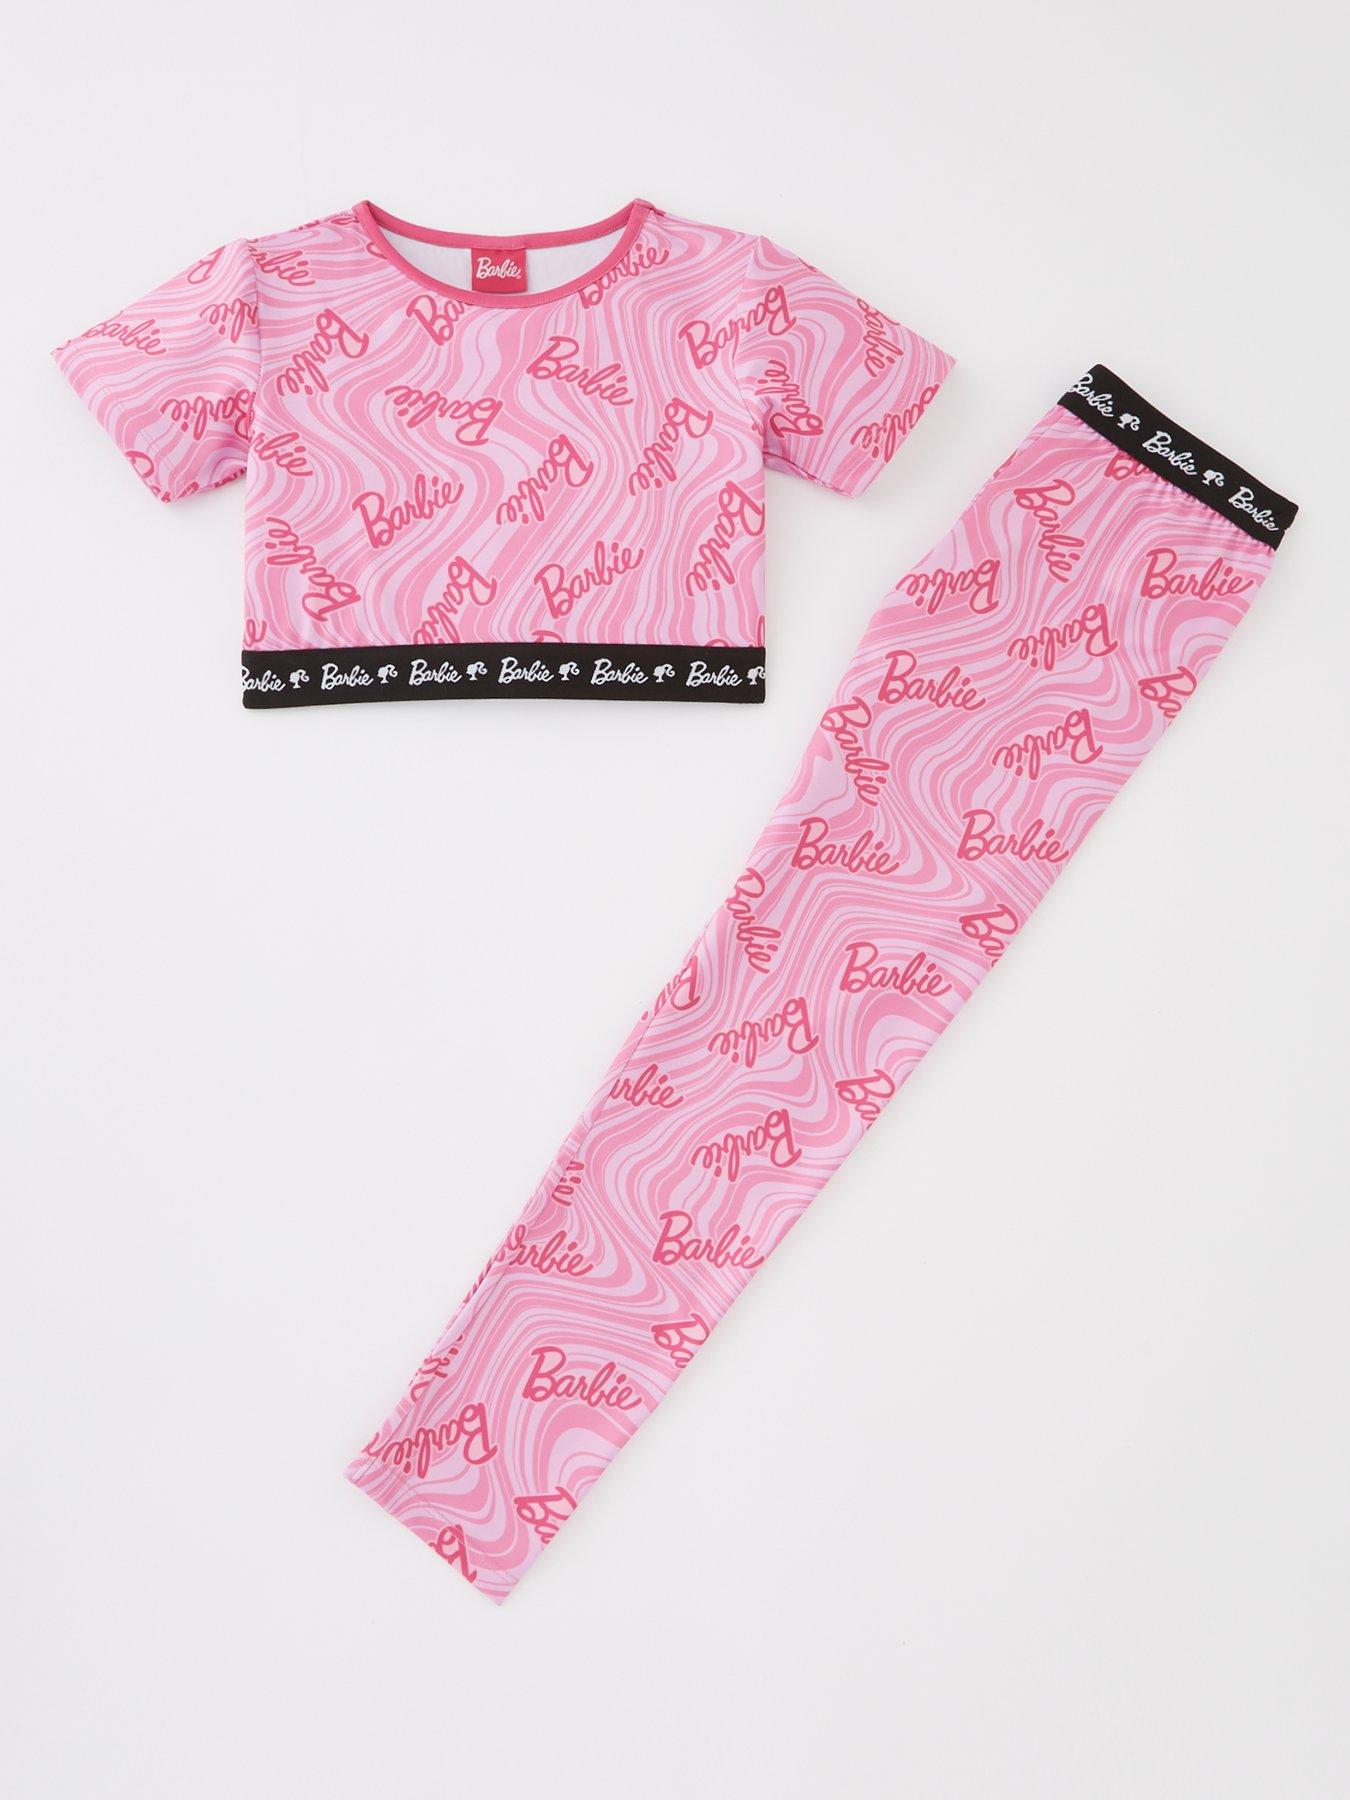 Barbie Clothes for Girls Aged 5 & 6 Years Old